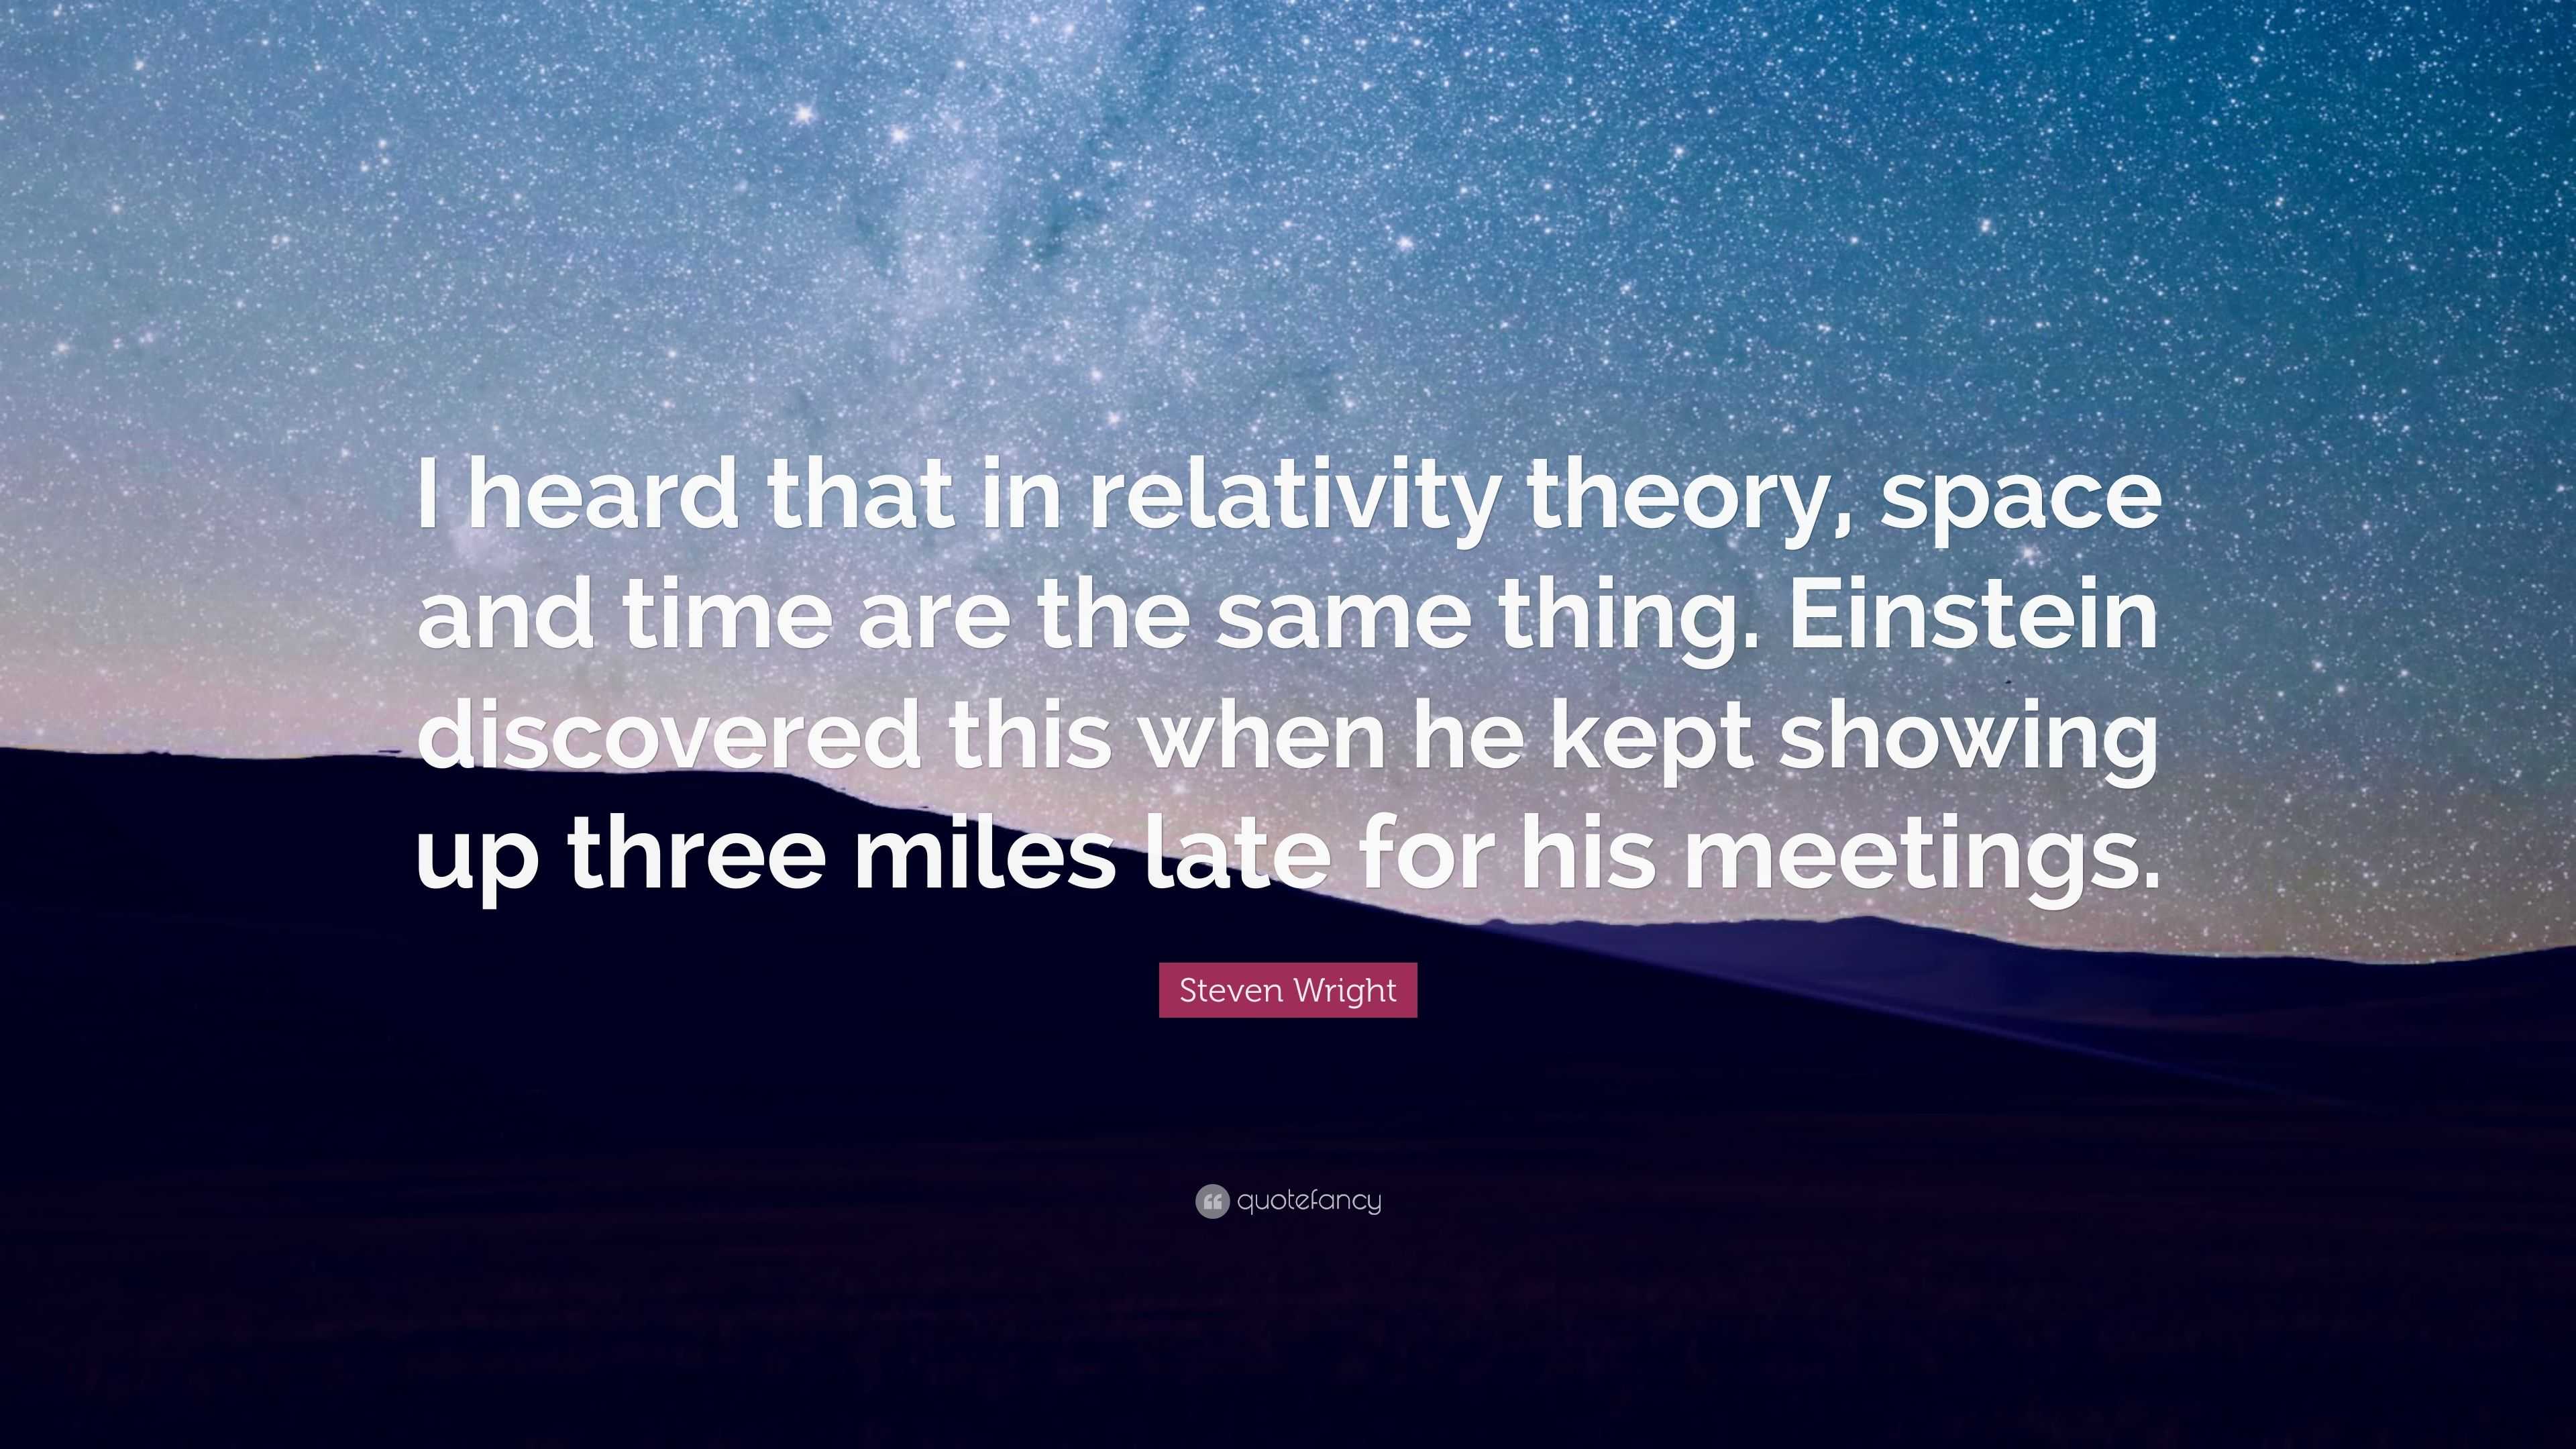 funny quotes about astronomy